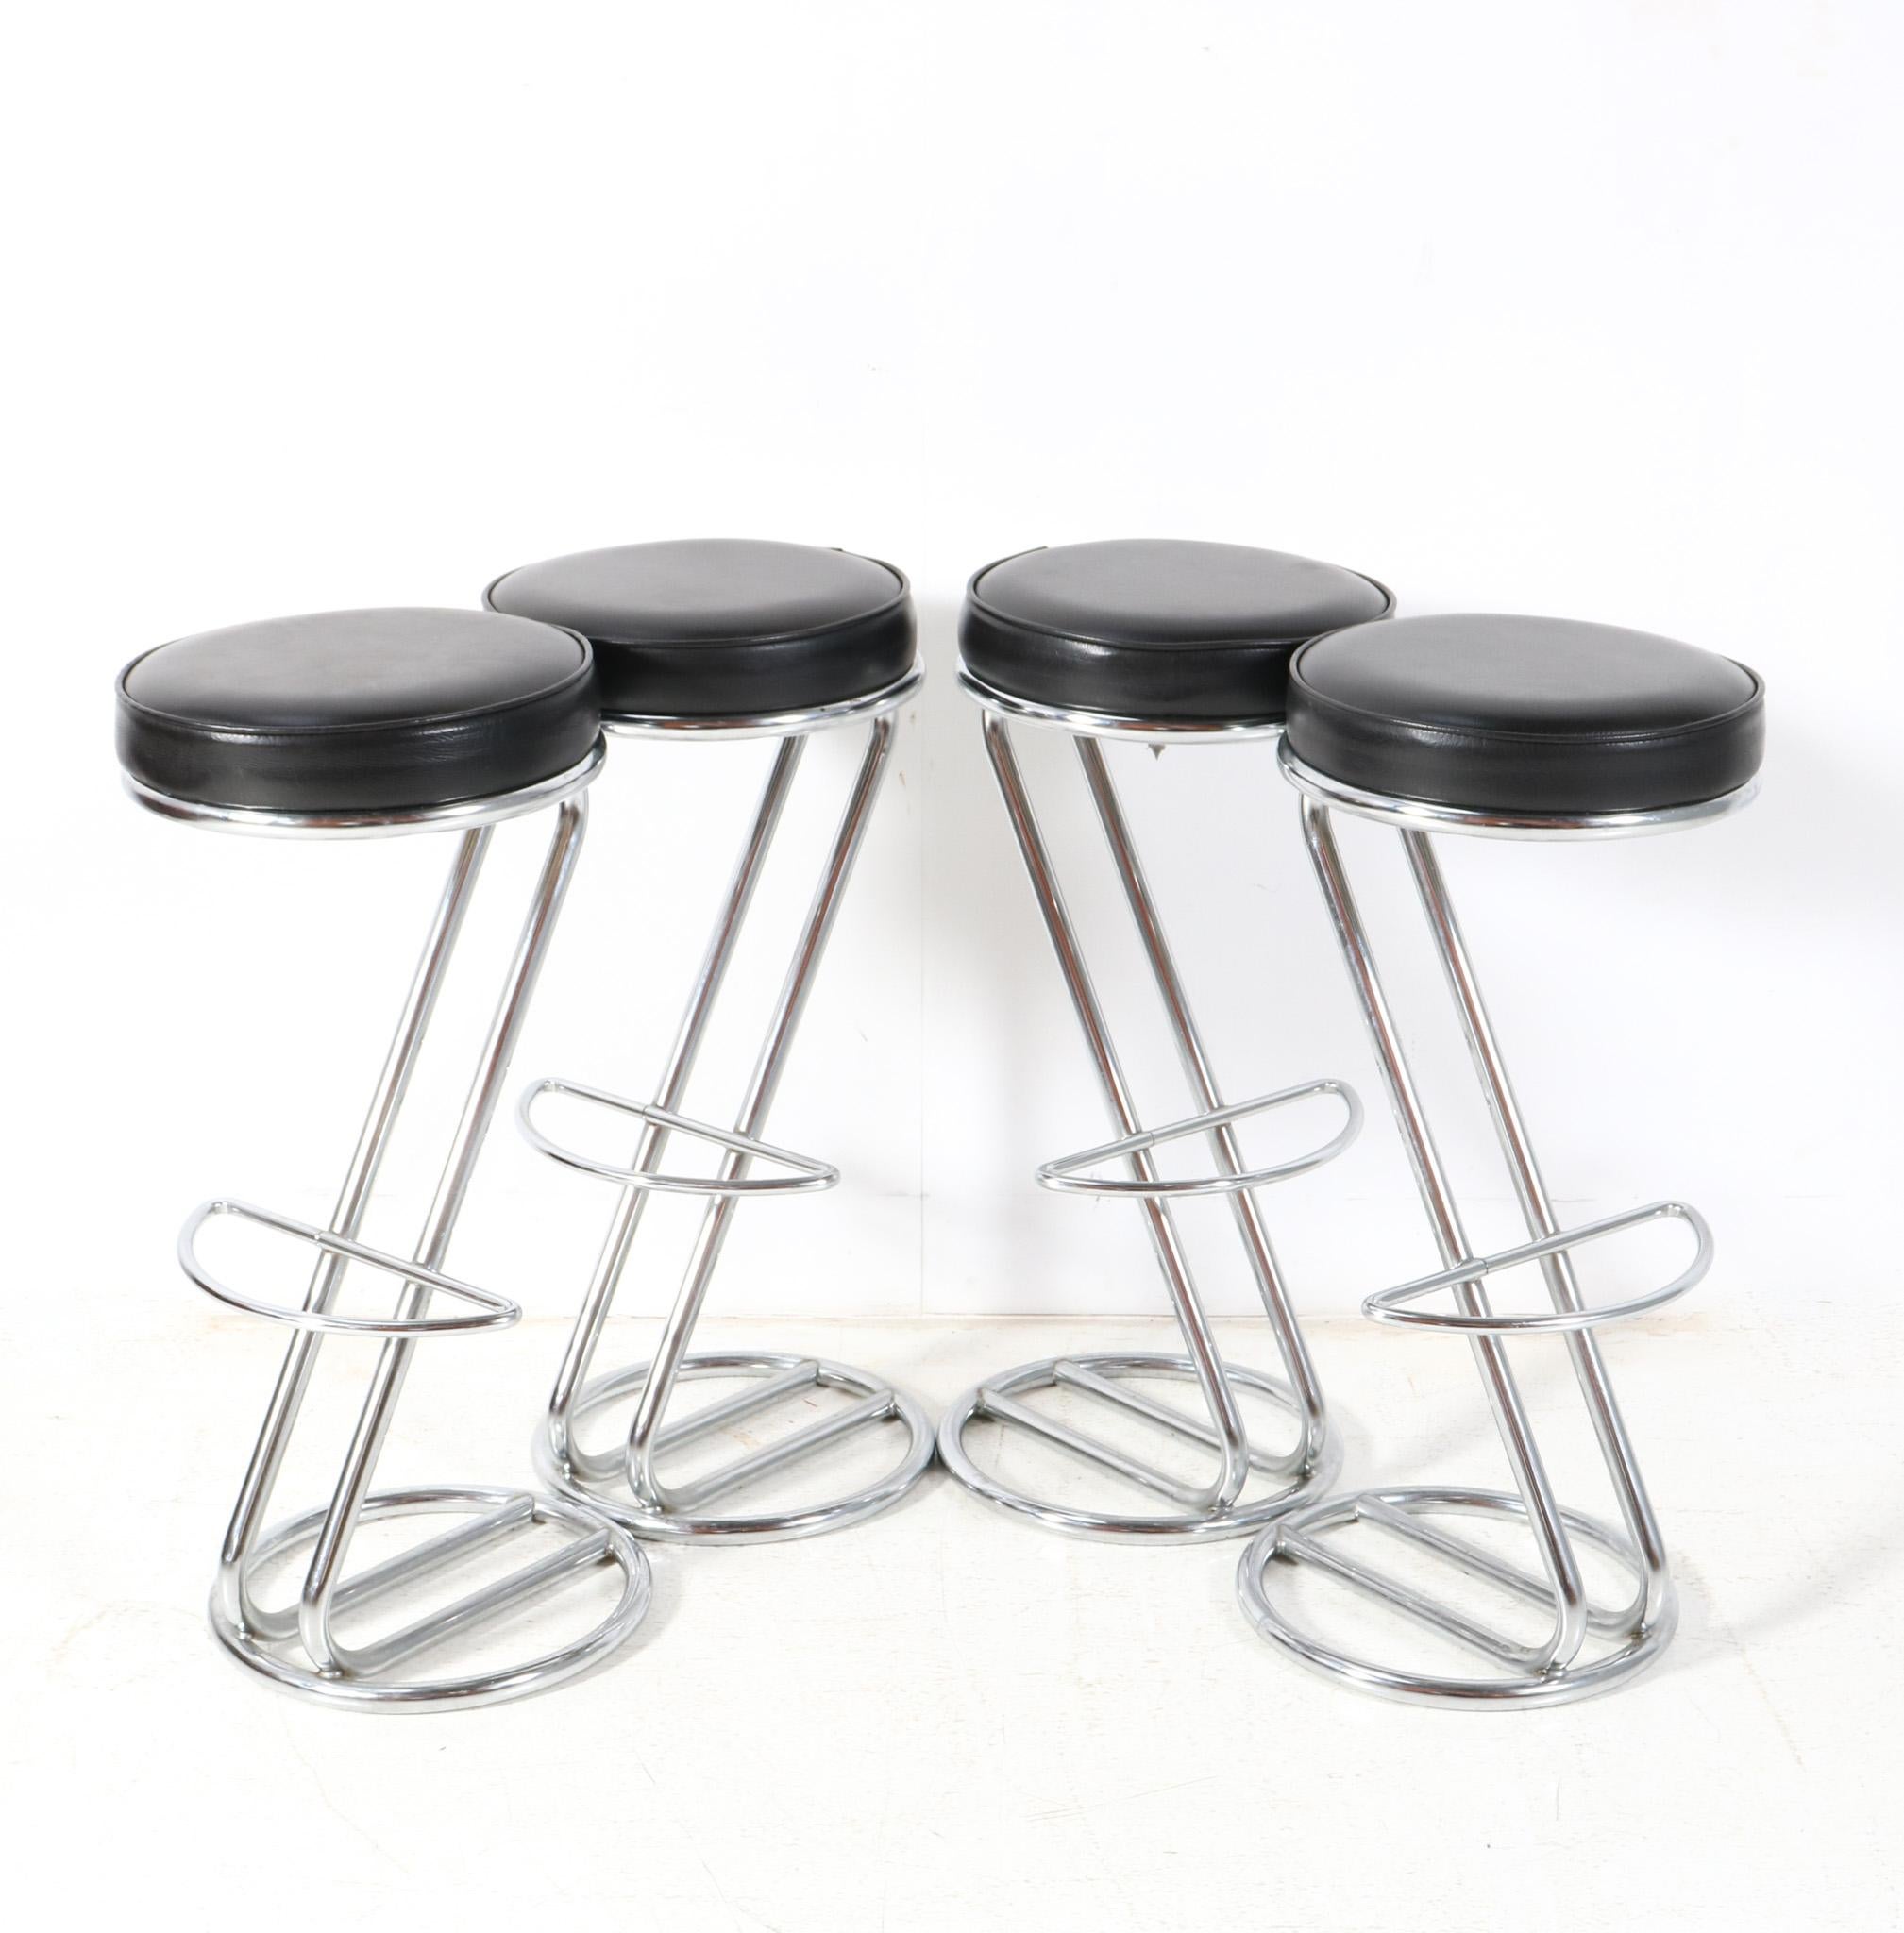 Late 20th Century Four Chrome and Faux Leather Mid-Century Modern Barstools, 1970s For Sale